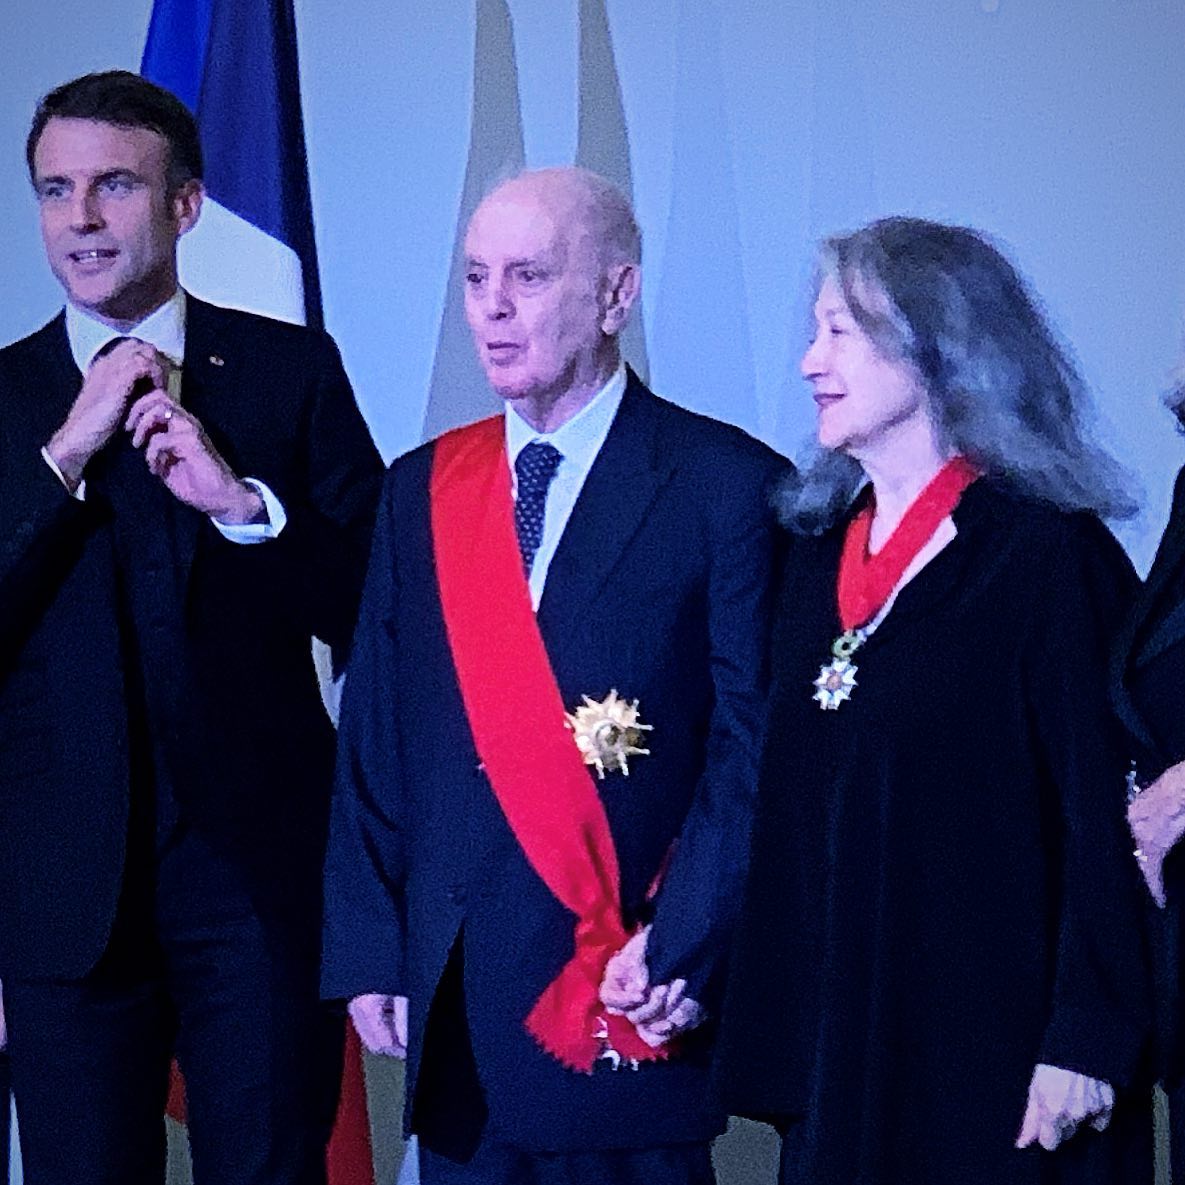 Ailing Barenboim, radiant Argerich, decorated by President Macron